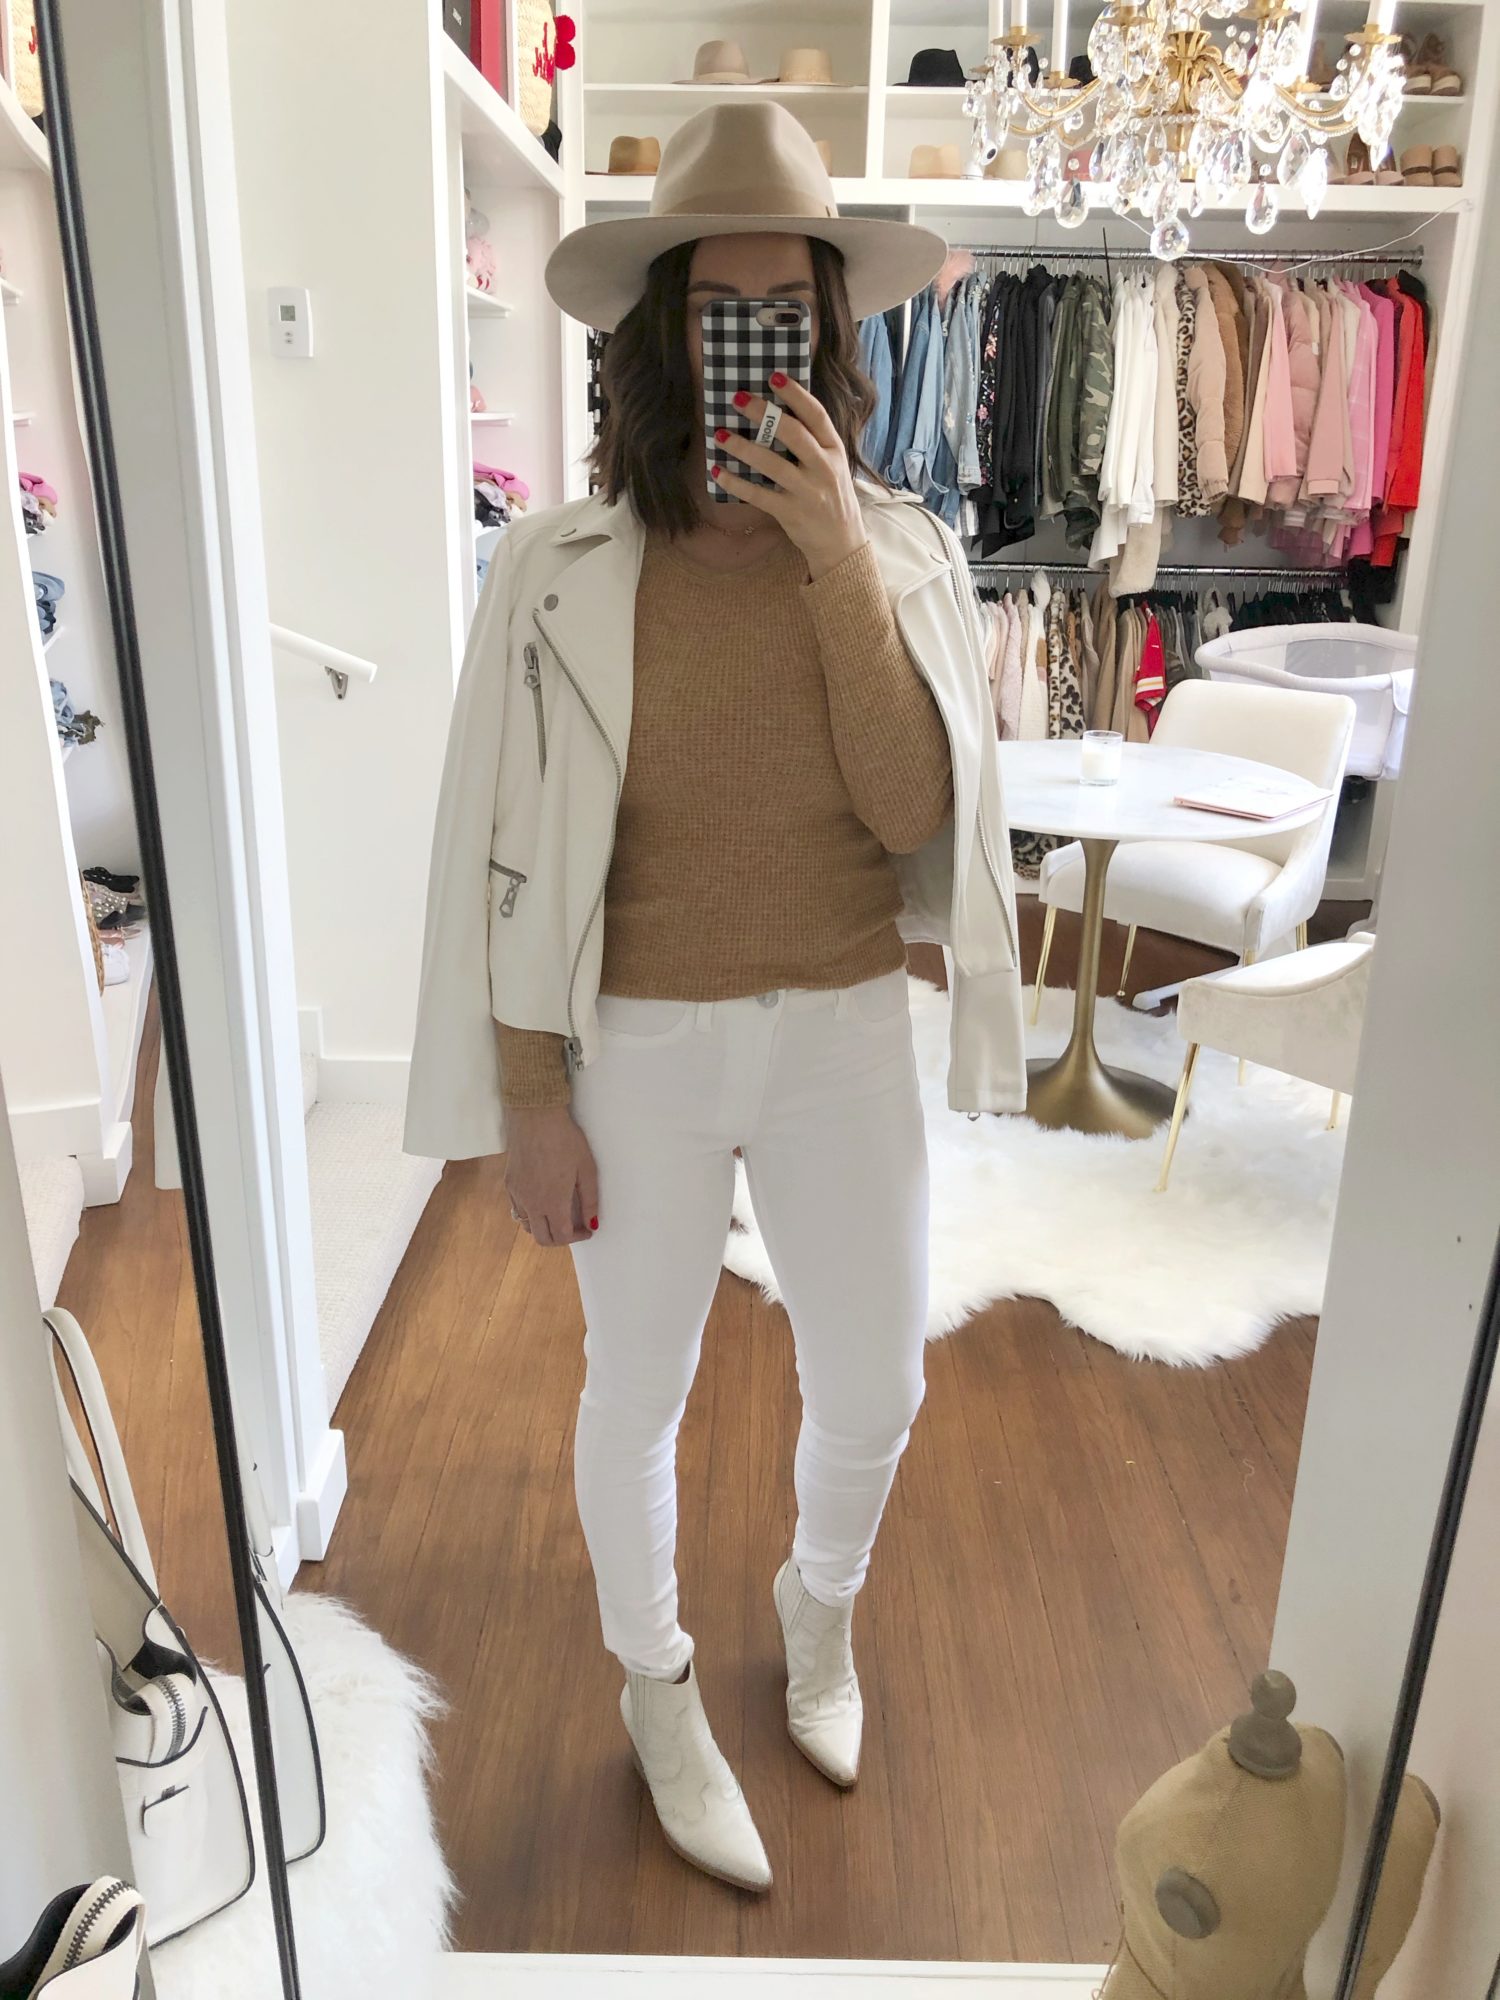 spring fashion finds